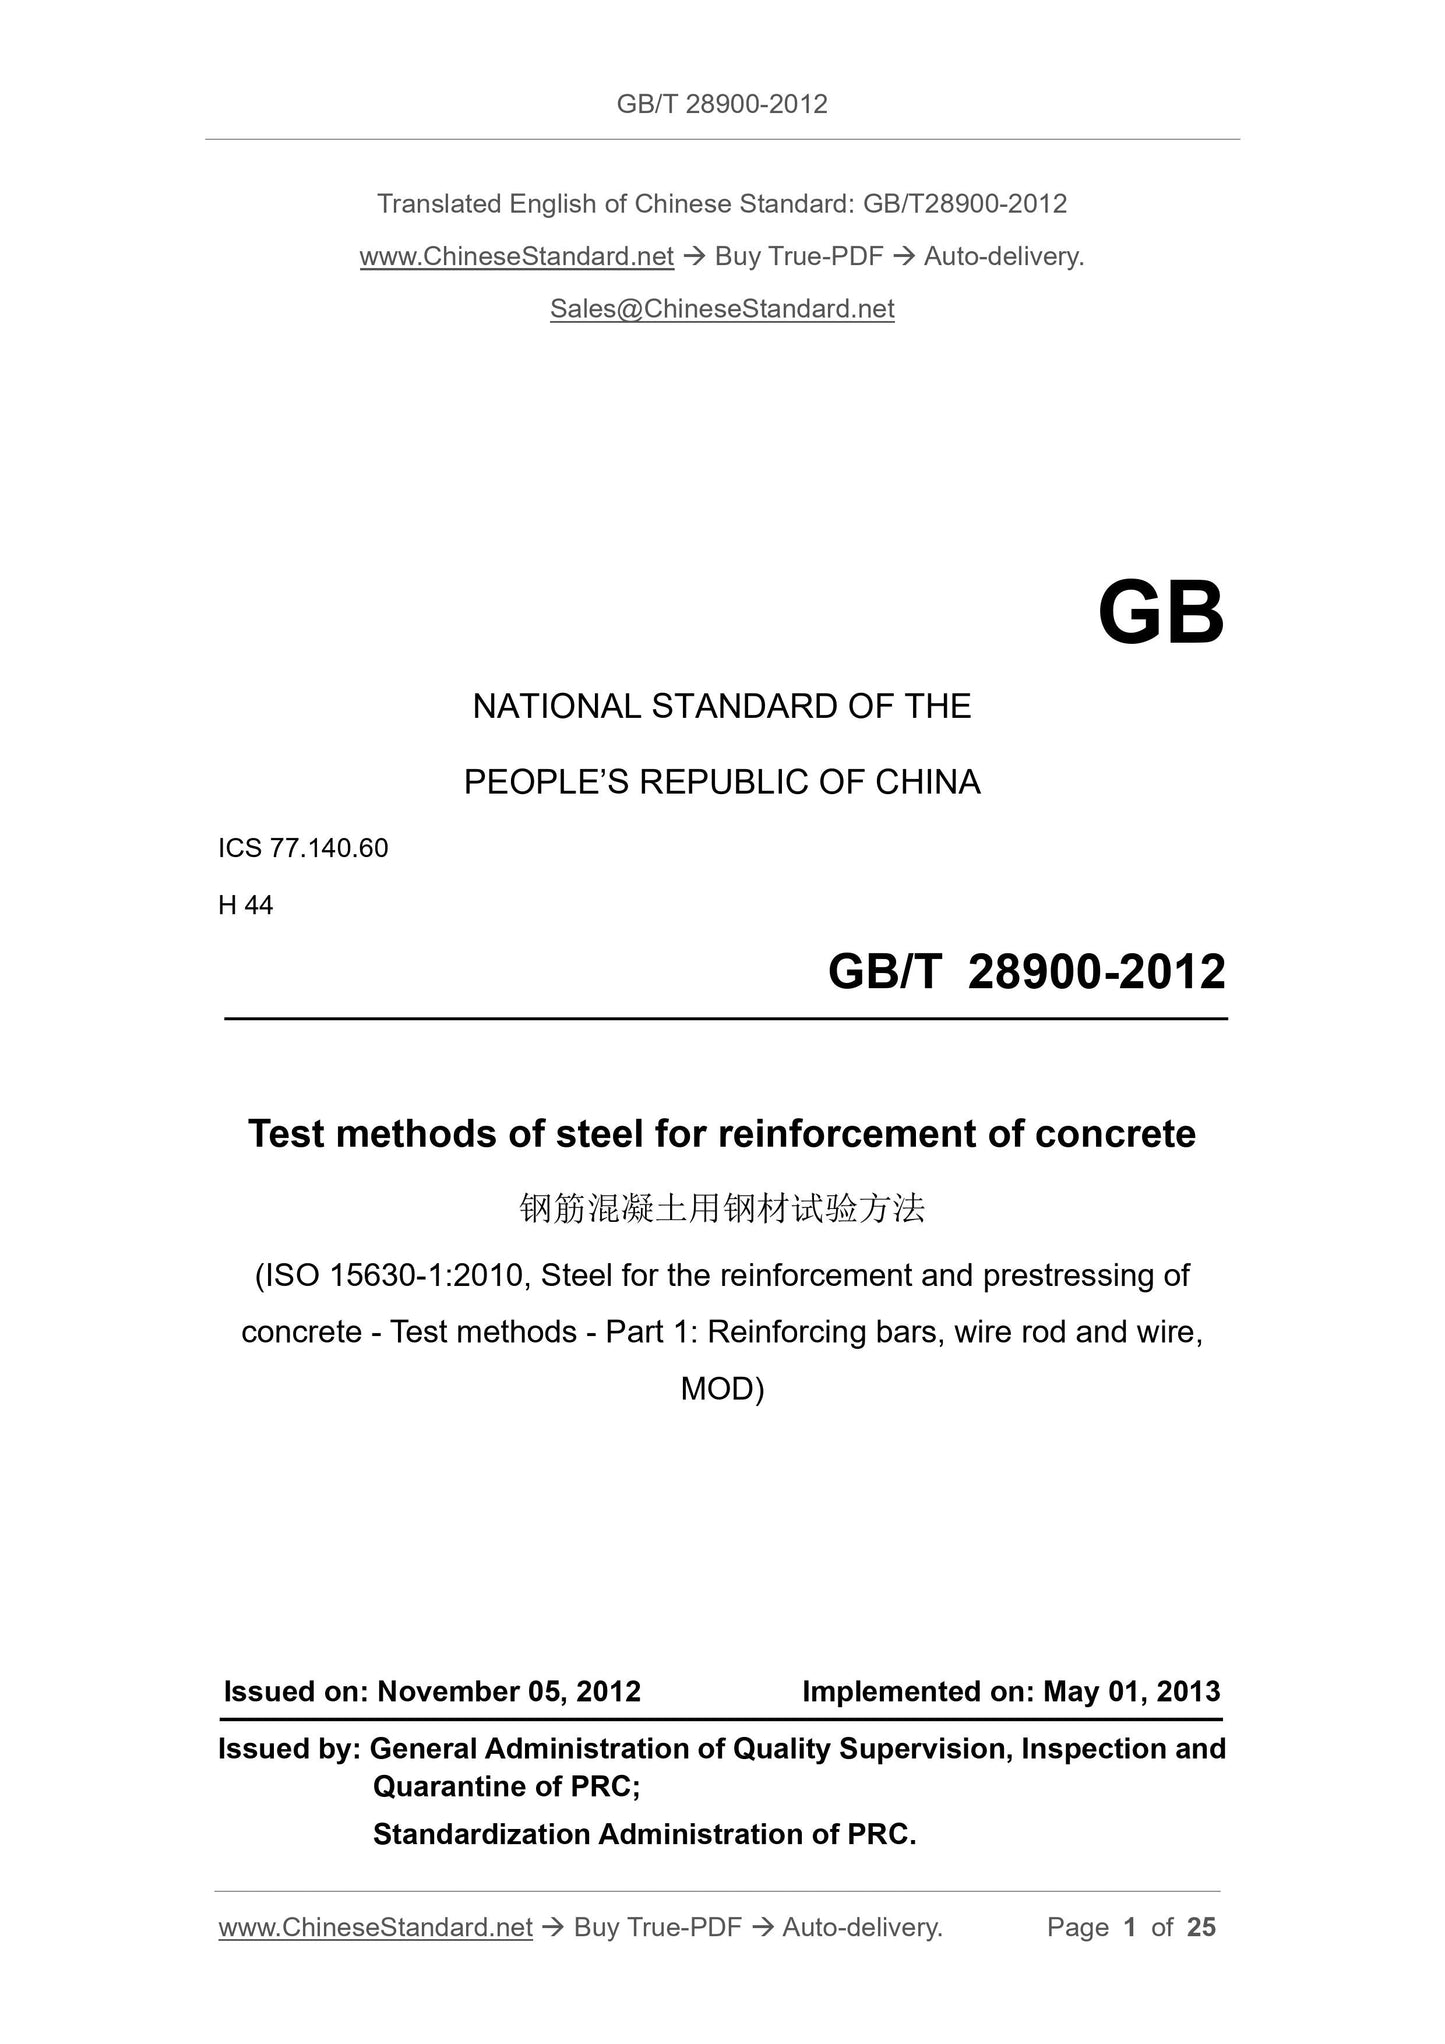 GB/T 28900-2012 Page 1